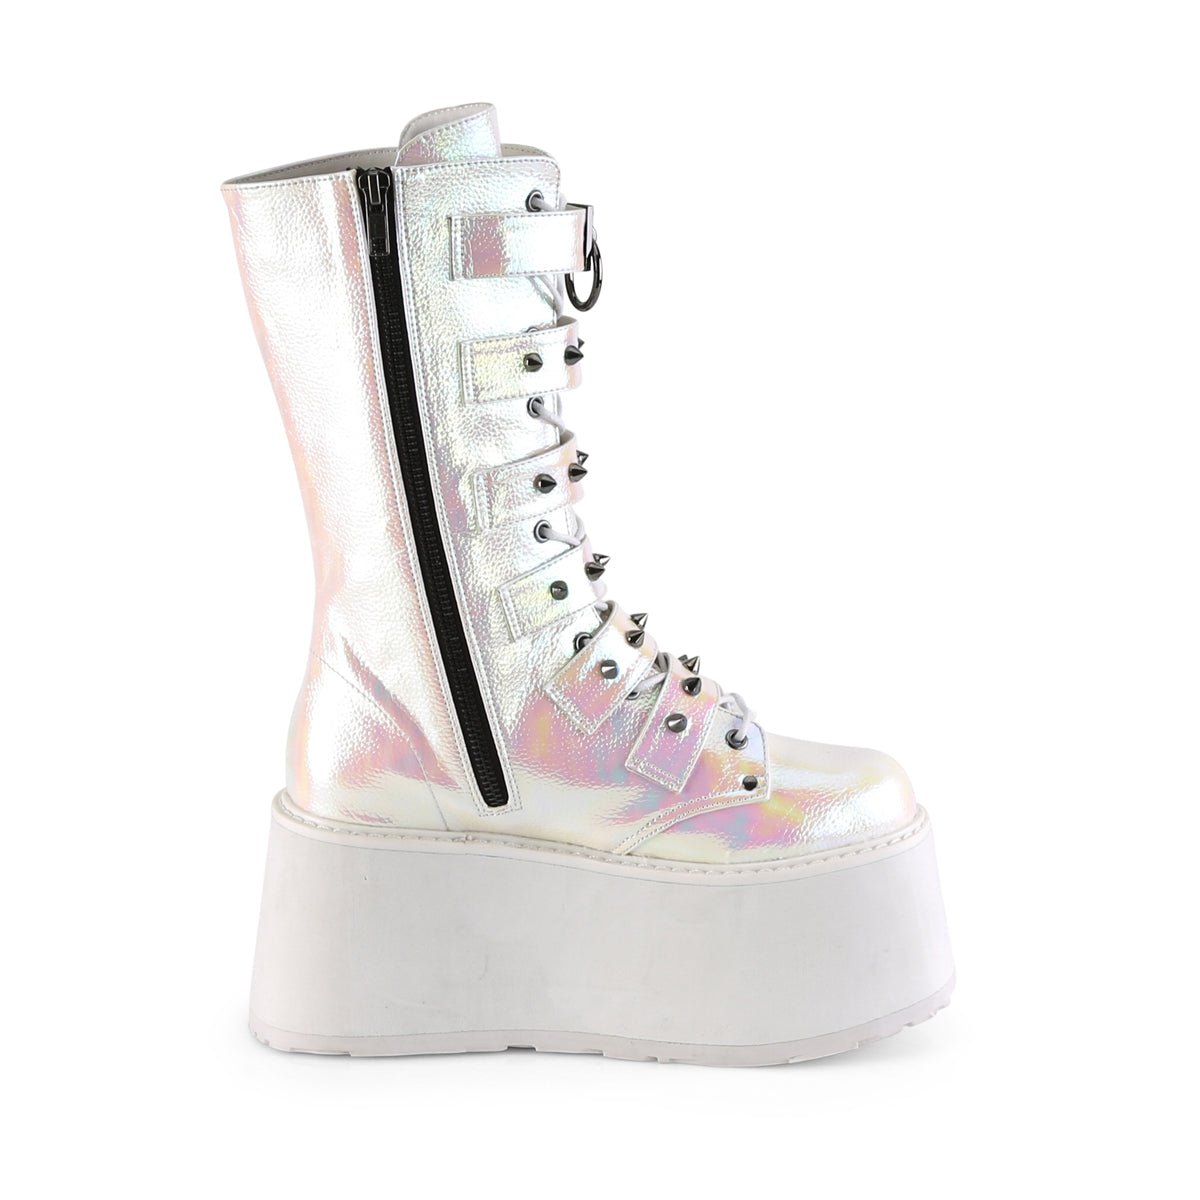 Too Fast | Demonia Damned 225 | Pearl Iridescent Vegan Leather Women&#39;s Mid Calf Boots